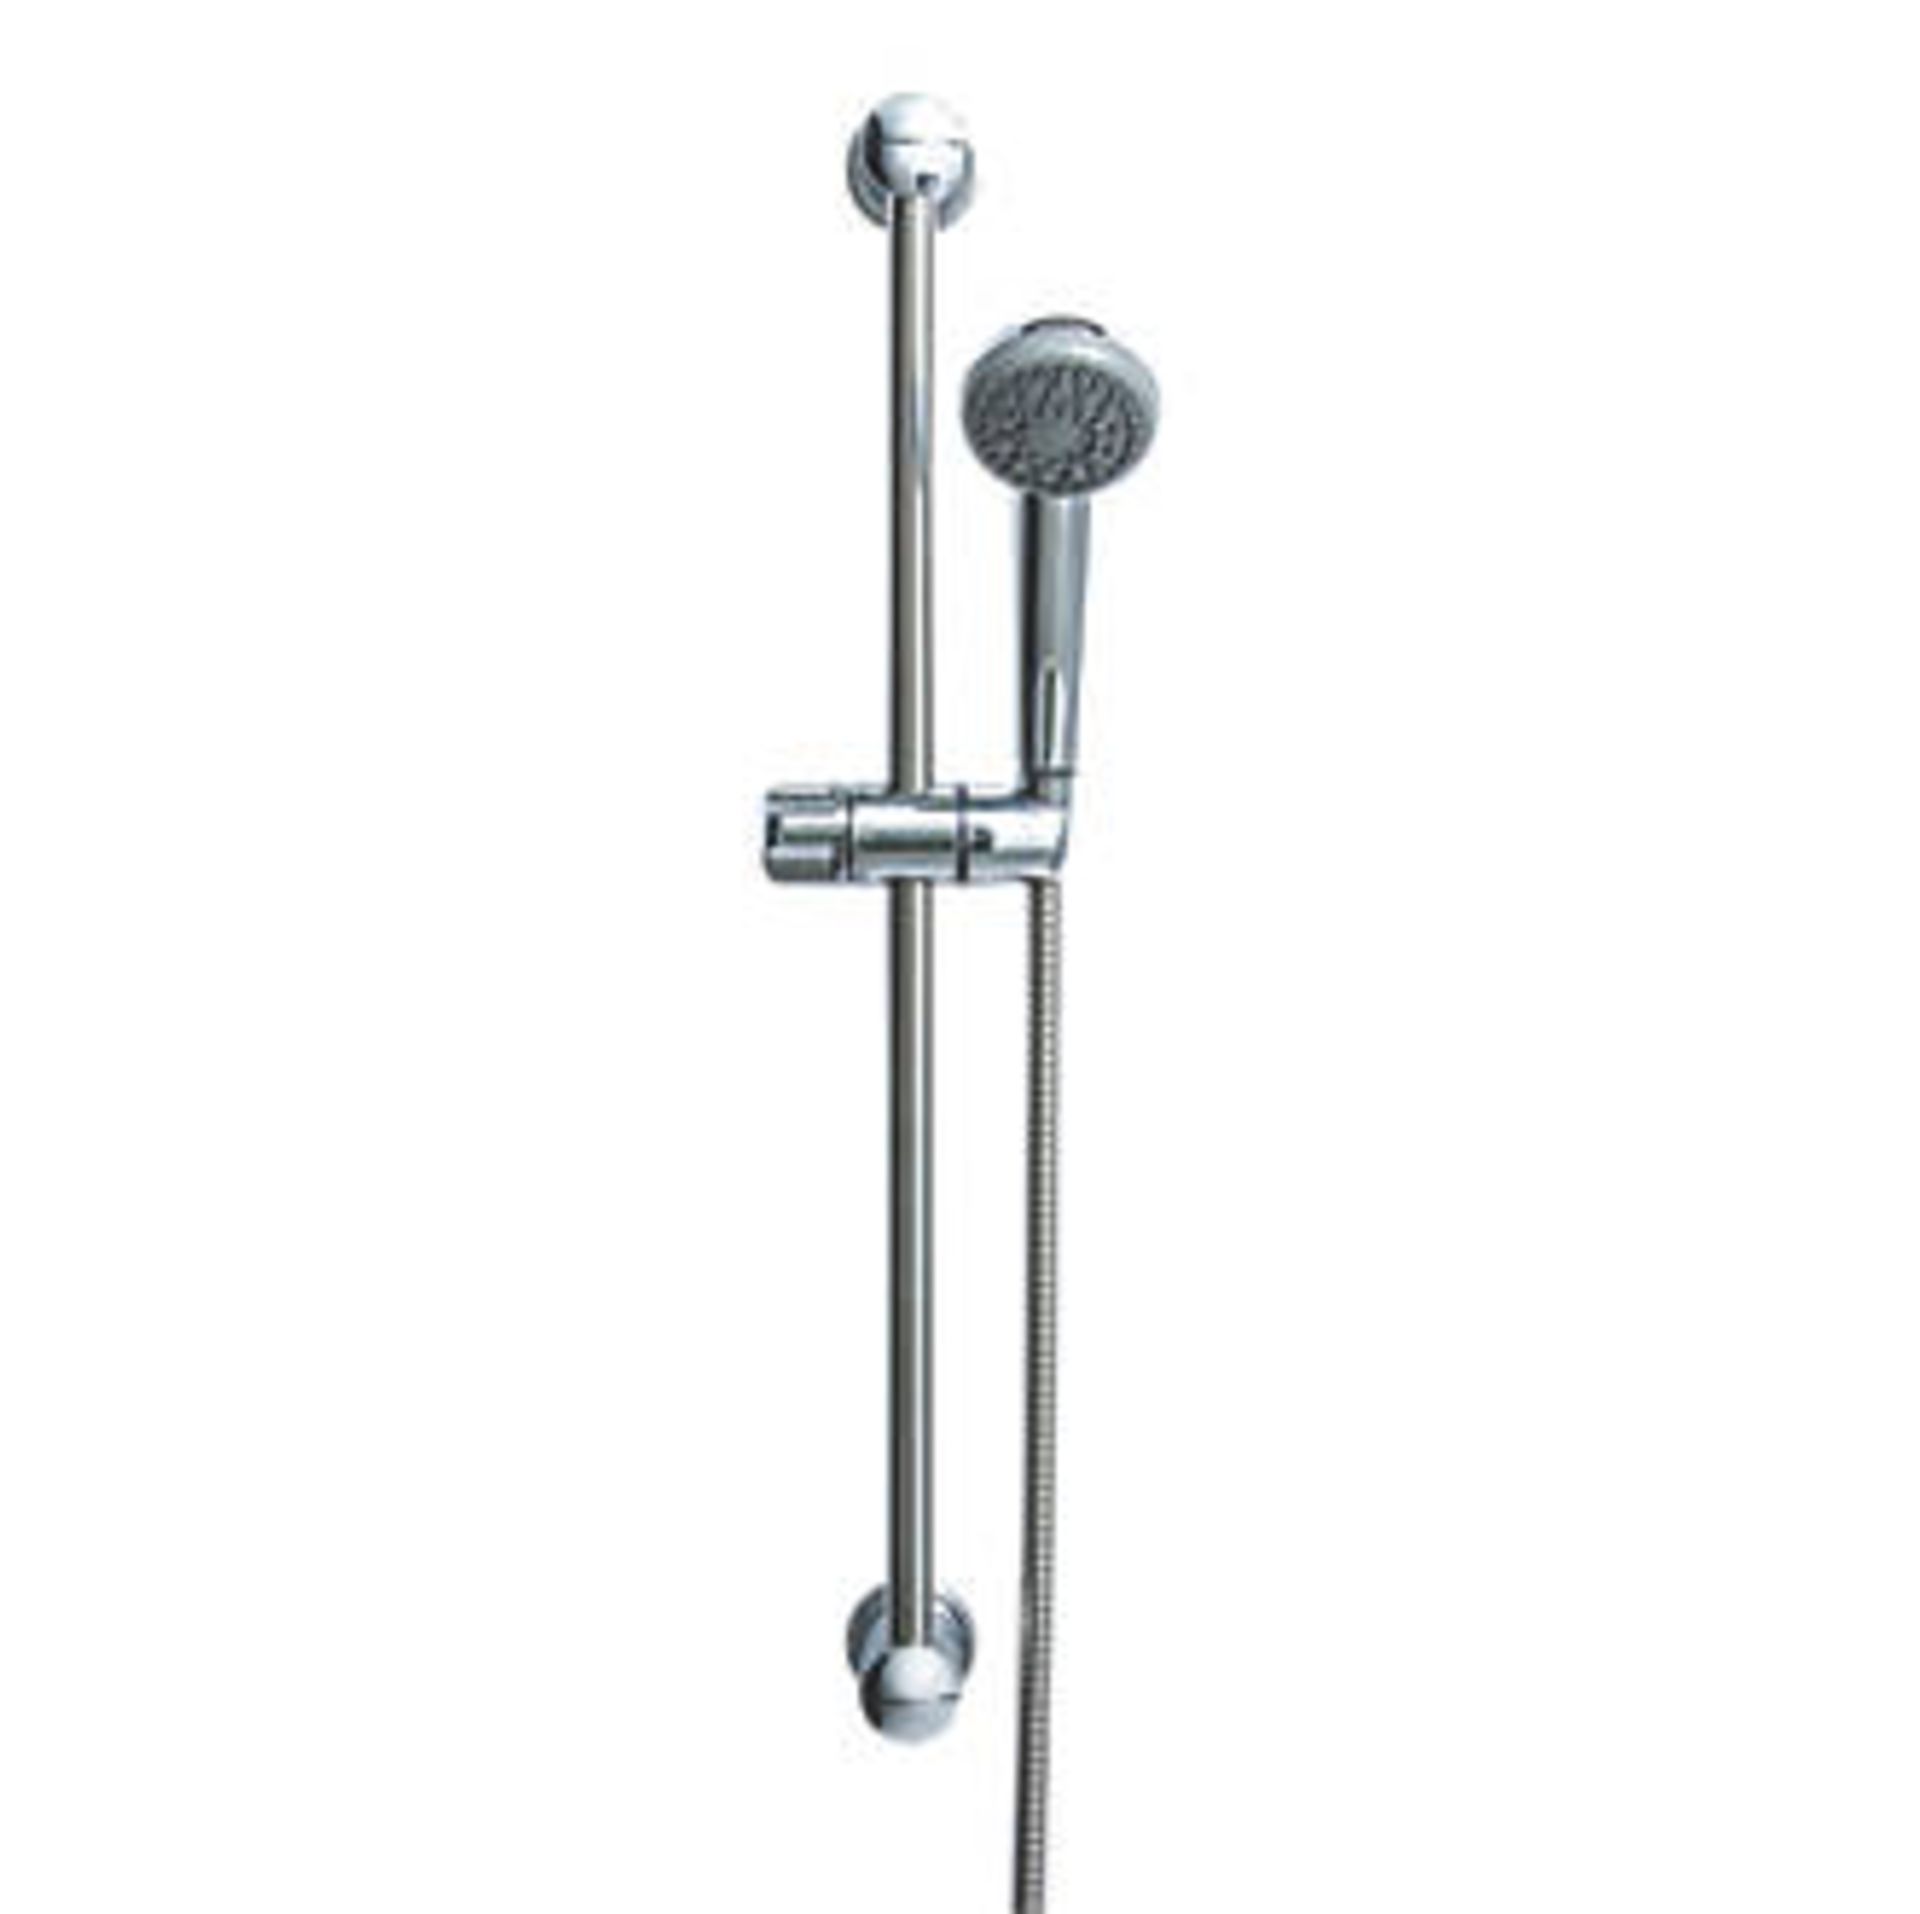 (SH1020) Zaina Chrome effect Shower kit. This shower kit from has a chrome effect finish, and ...